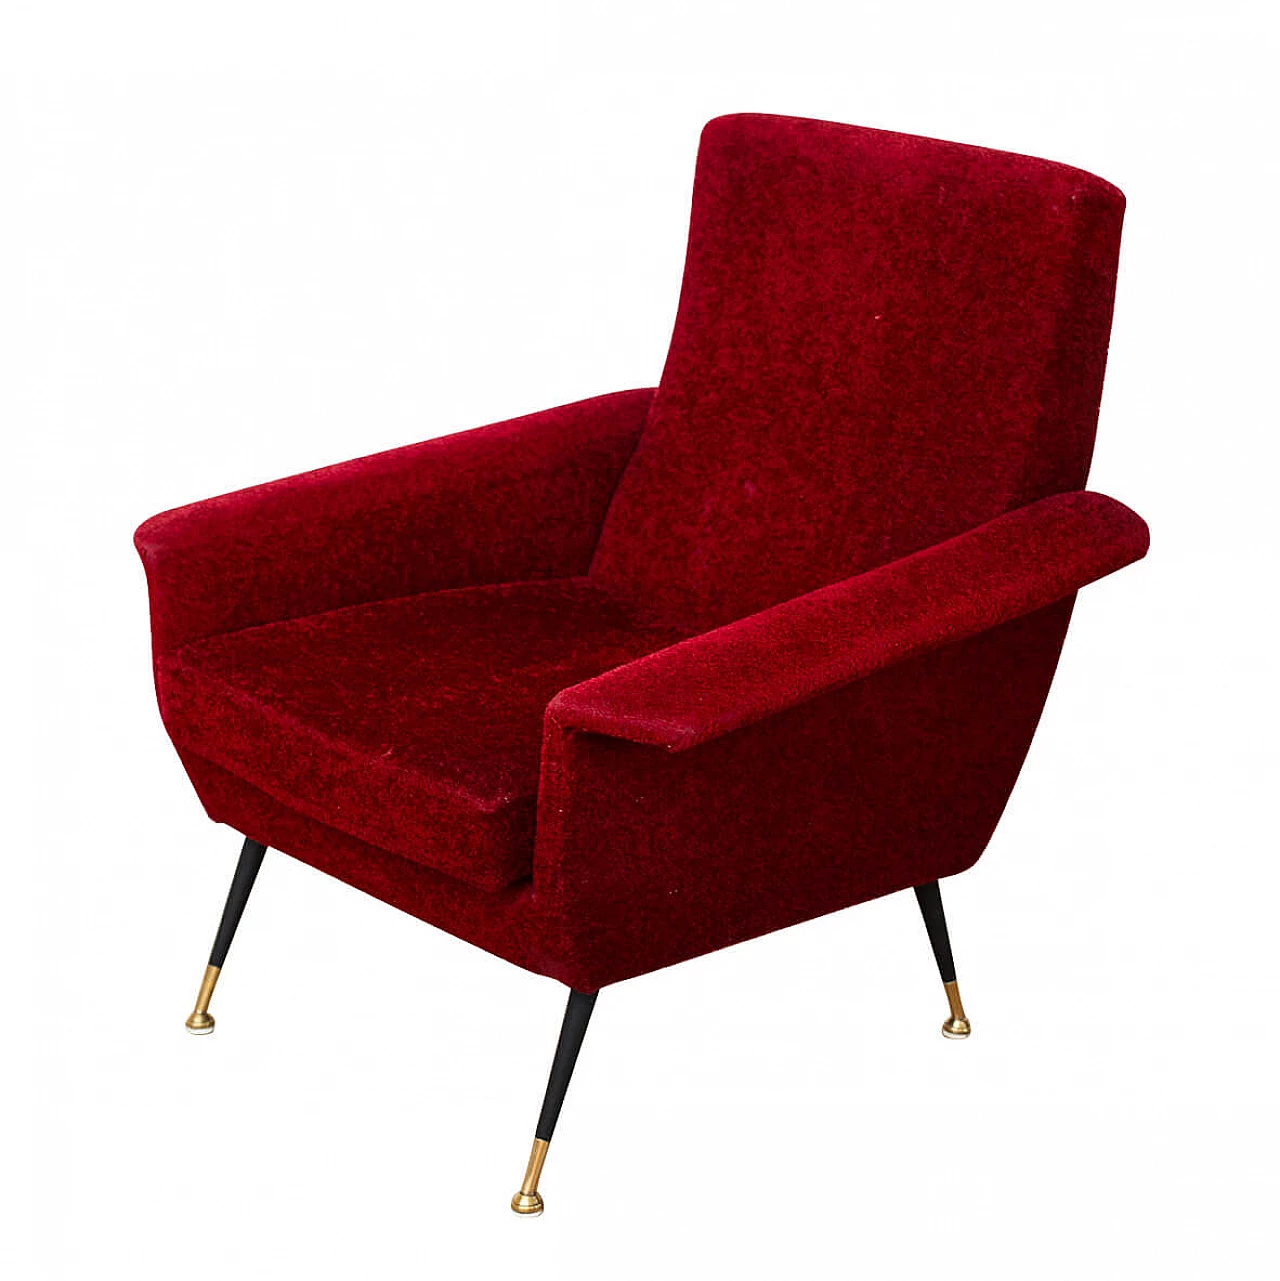 Armchair in cherry red bouclé fabric, 1950s 1270302